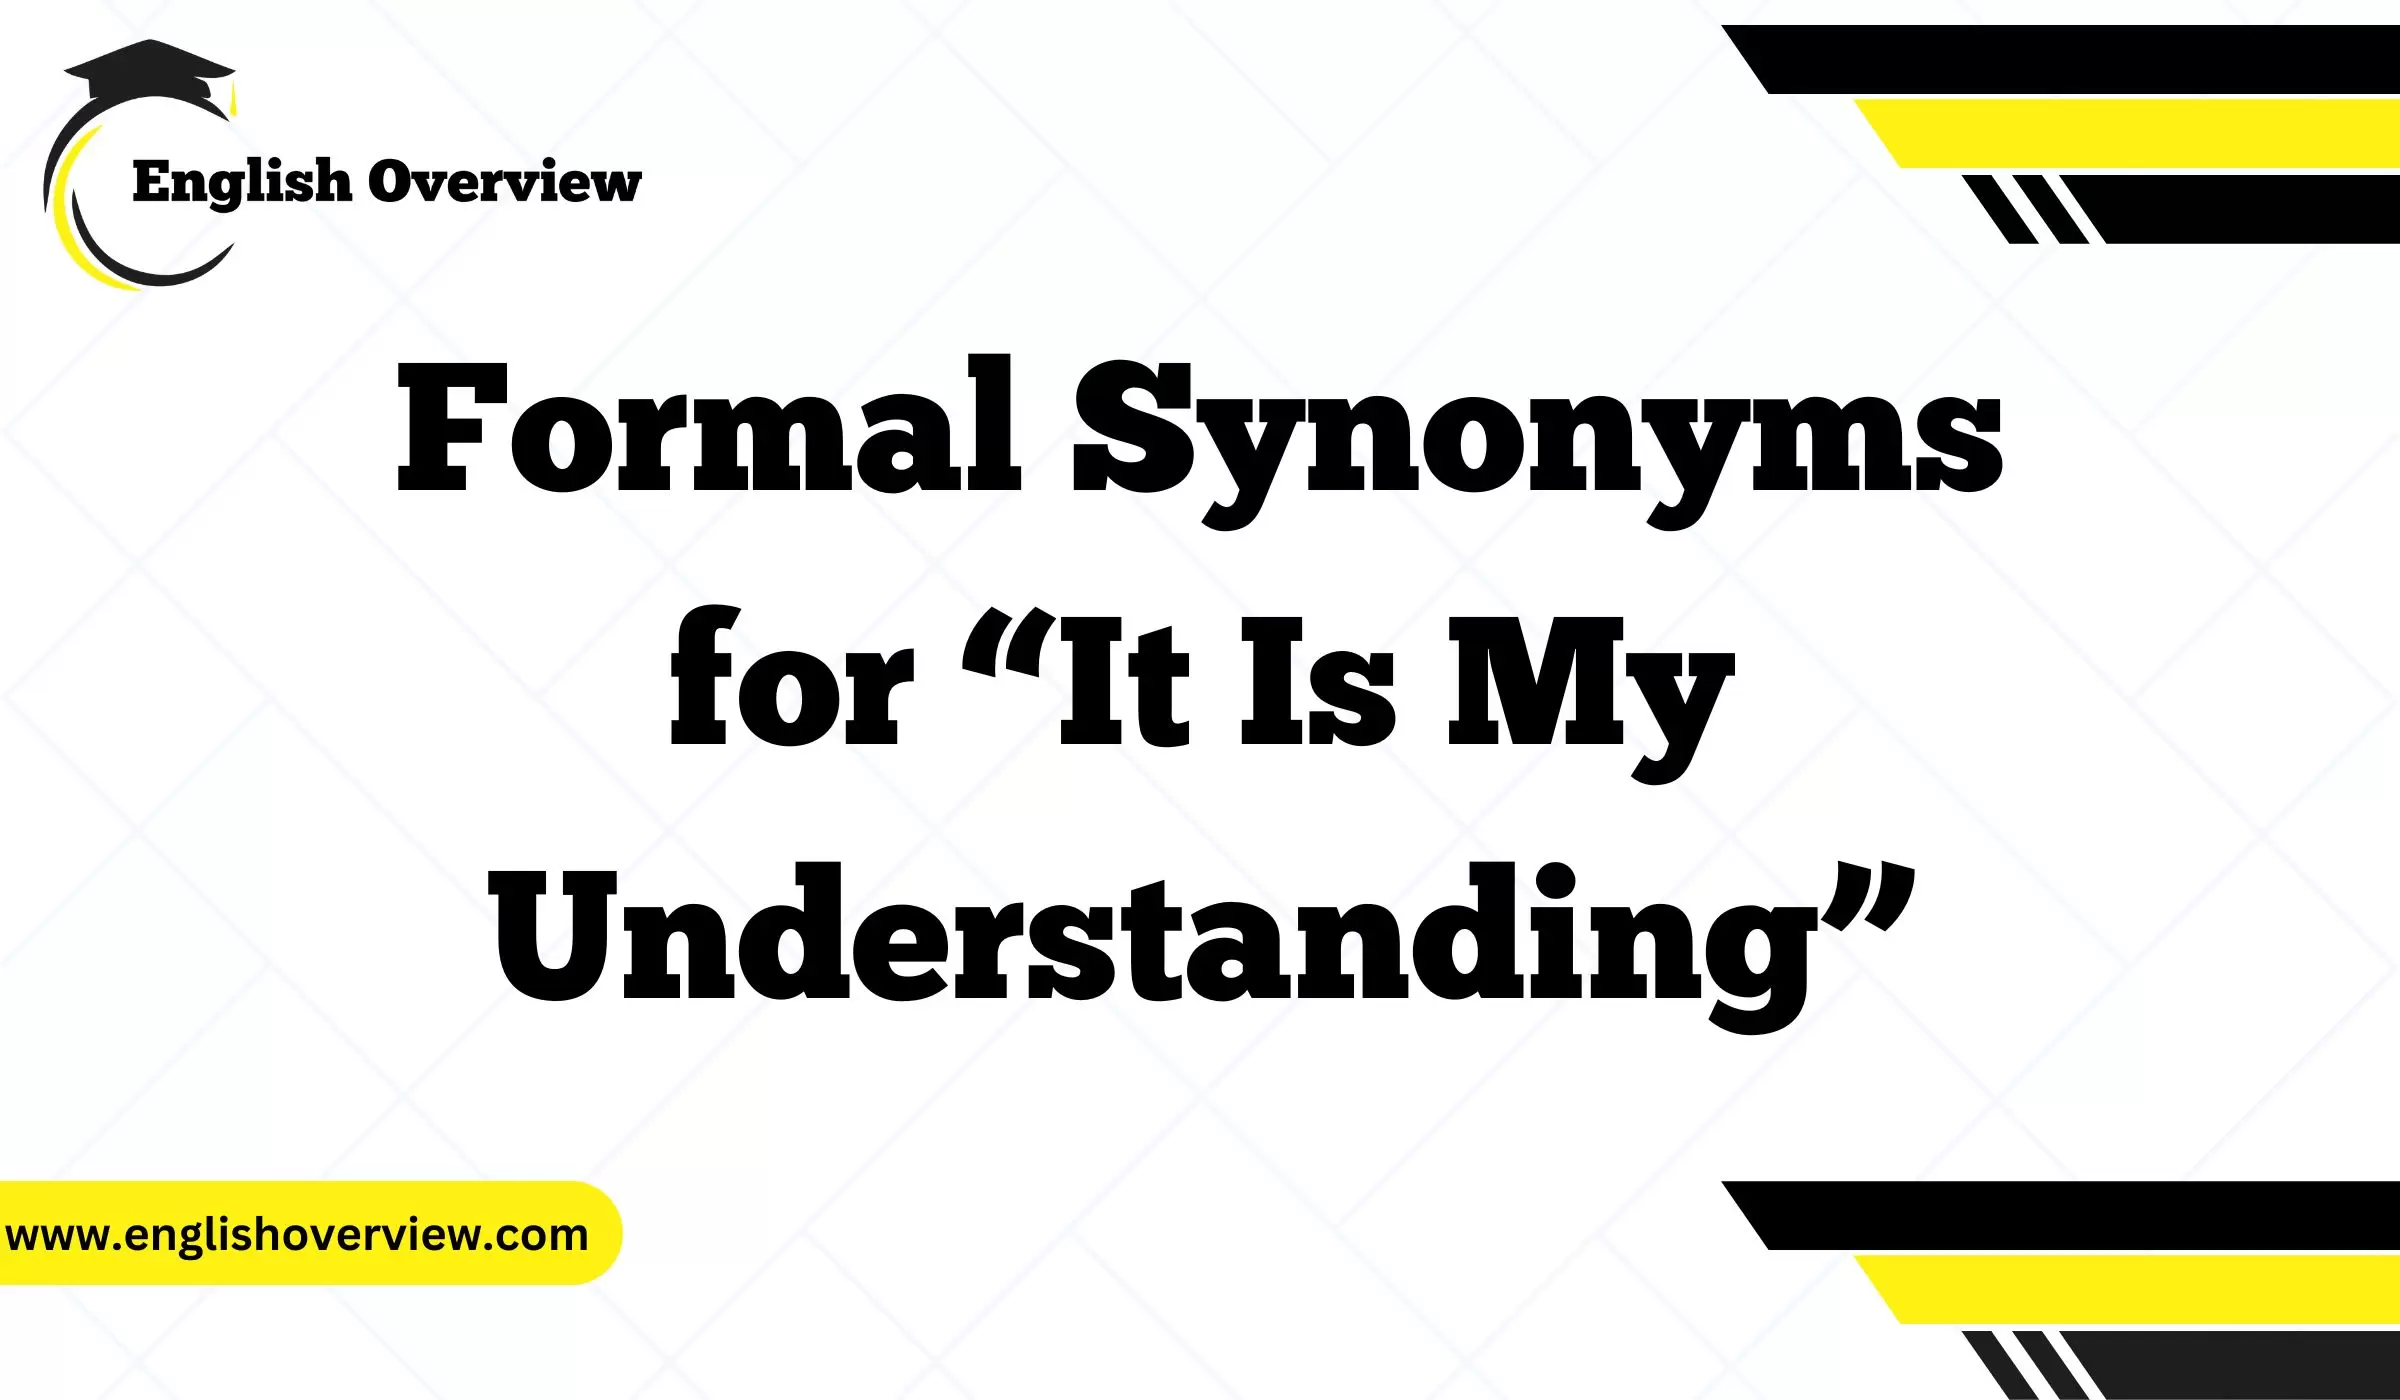 Formal Synonyms for “It Is My Understanding”